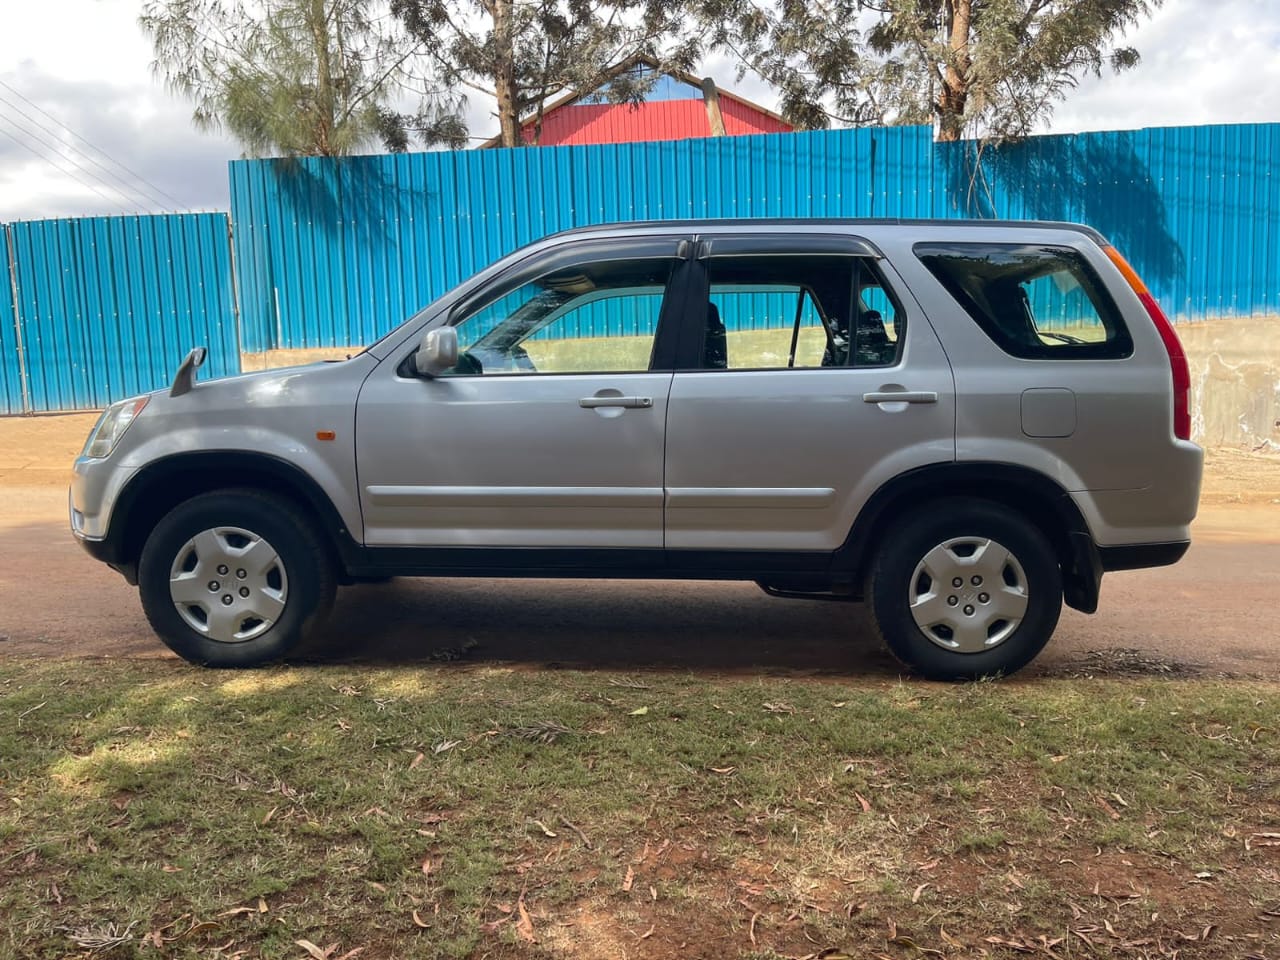 Honda CR-V 2004 Clean You Pay 20% Deposit Trade in OK as NEW